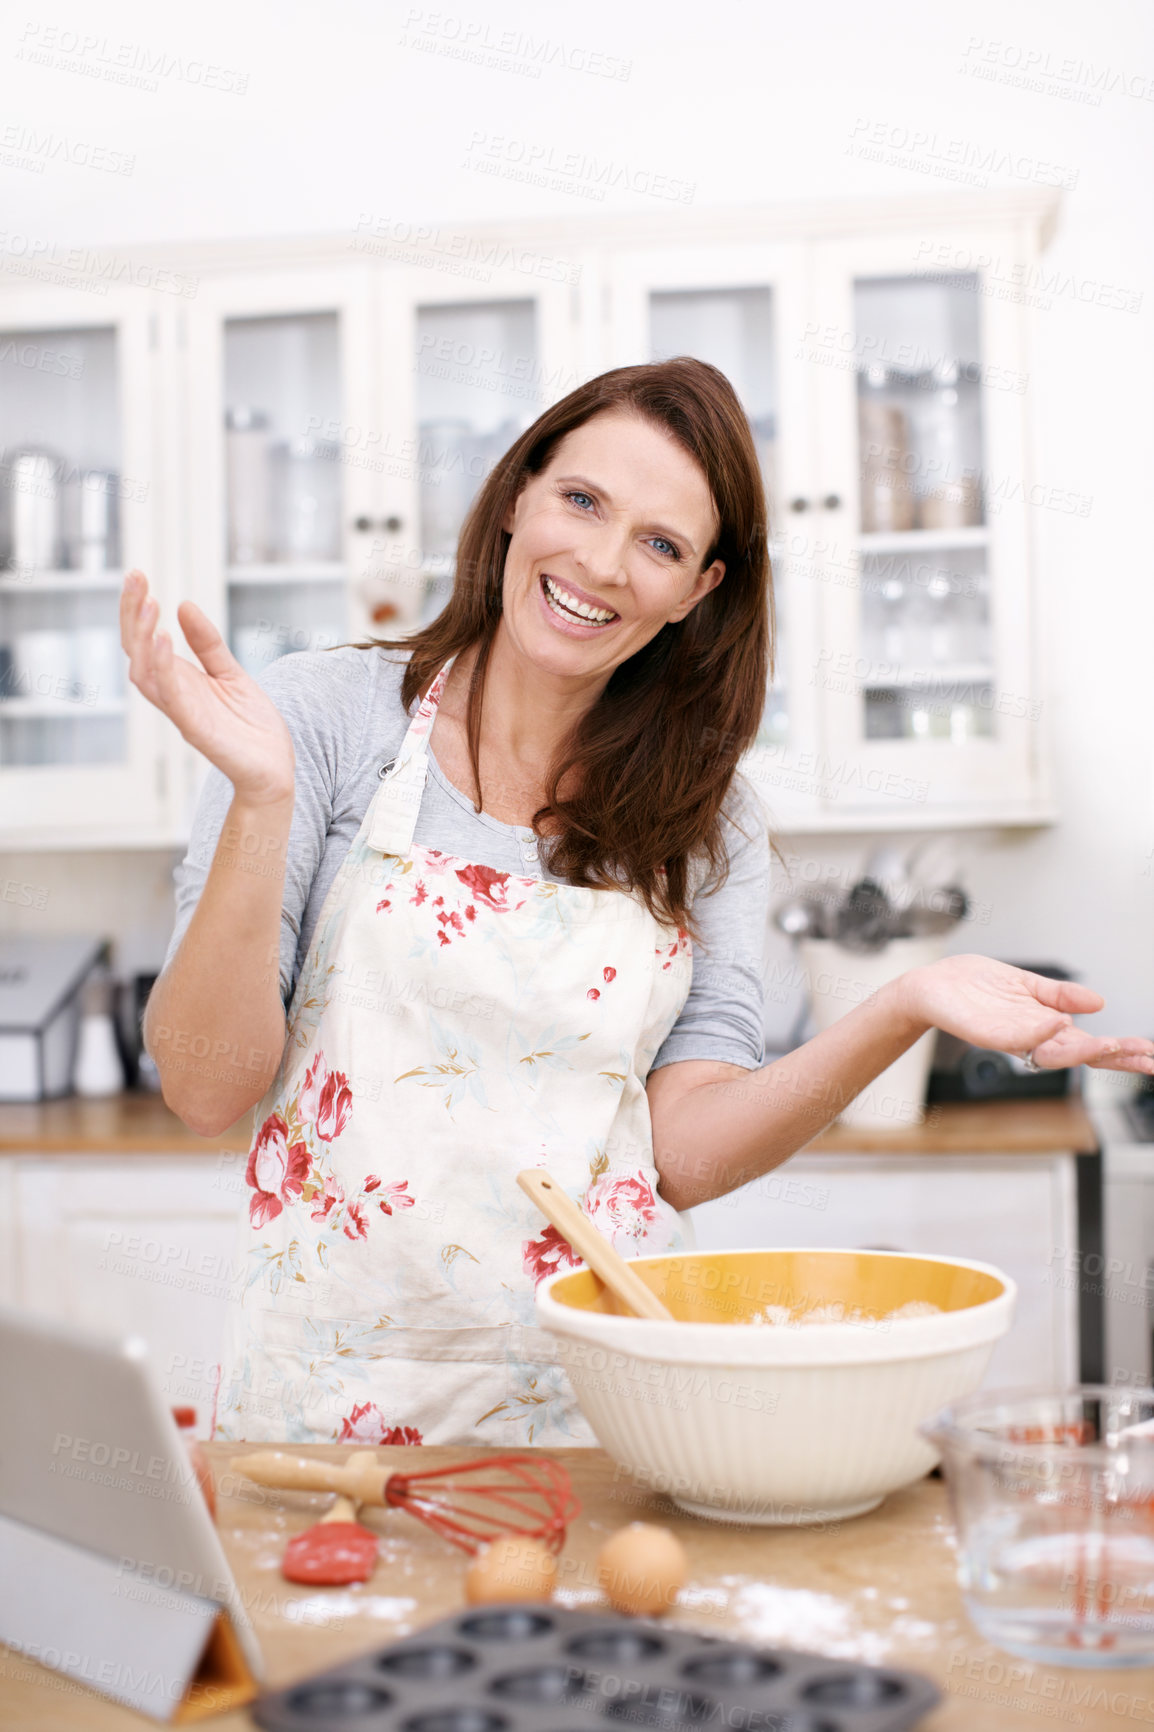 Buy stock photo Portrait of a mature woman standing with her arms raised while baking in the kitchen